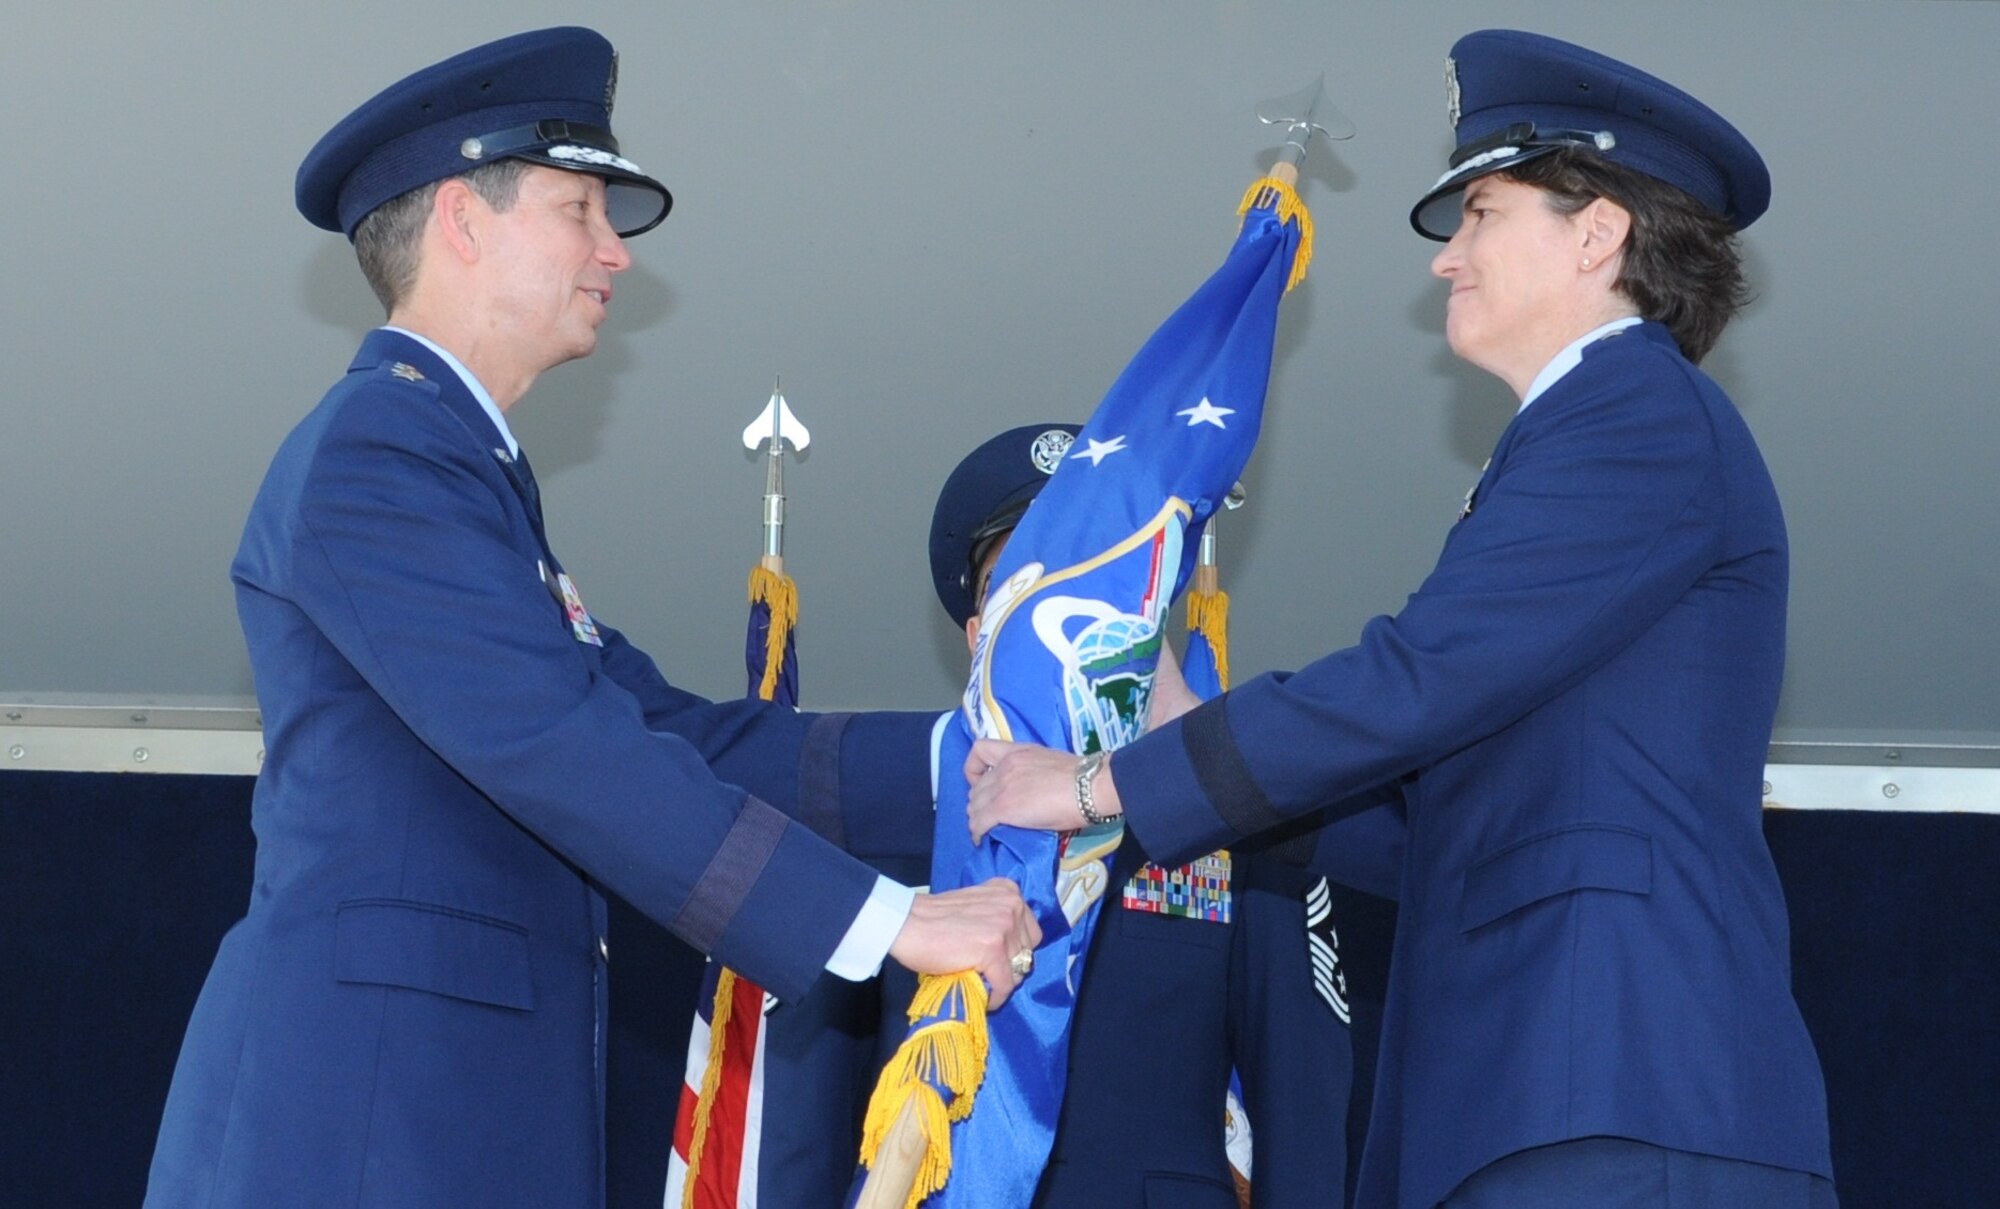 Maj. Gen. Peggy Poore (right) accepts the Air Force Personnel Center guidon from Lt. Gen. Darrell Jones, the Air Force deputy chief of staff for manpower, personnel and services, during the AFPC change of command ceremony Aug. 1, 2013, at Joint Base San Antonio-Randolph, Texas. Relinquishing command was Maj. Gen. A.J. Stewart, who commanded AFPC since Aug. 6, 2010. (Courtesy Photo)